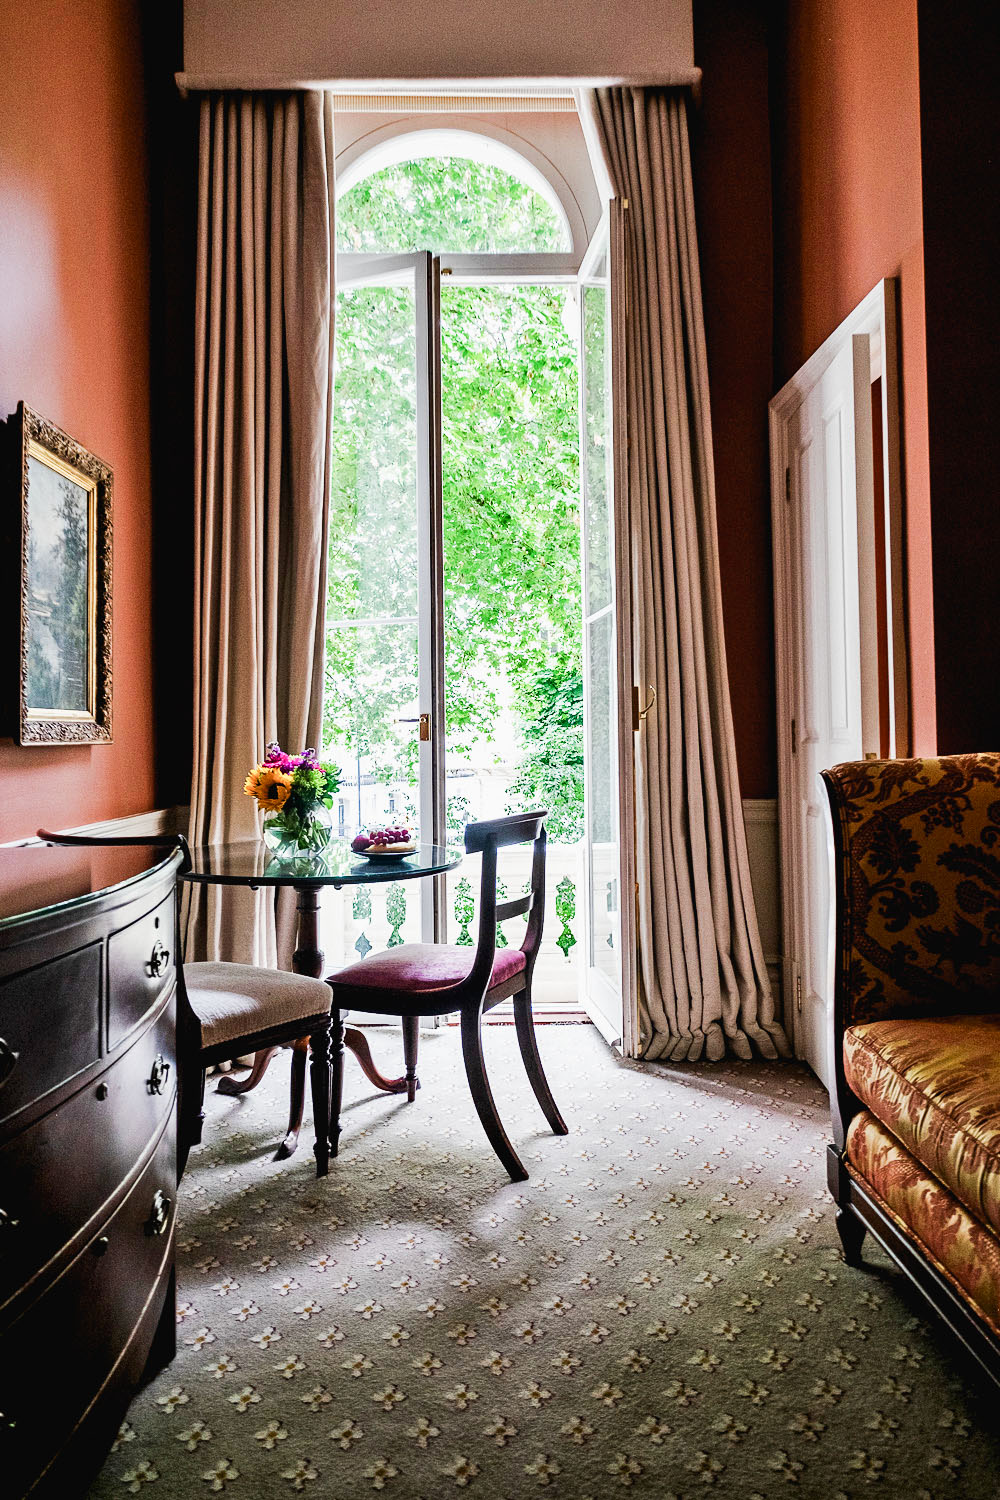 Junior Suite at Roseate House London, a luxury boutique hotel with 48 rooms and suites across three connecting Grade-II townhouses in Westbourne Terrace | Mondomulia